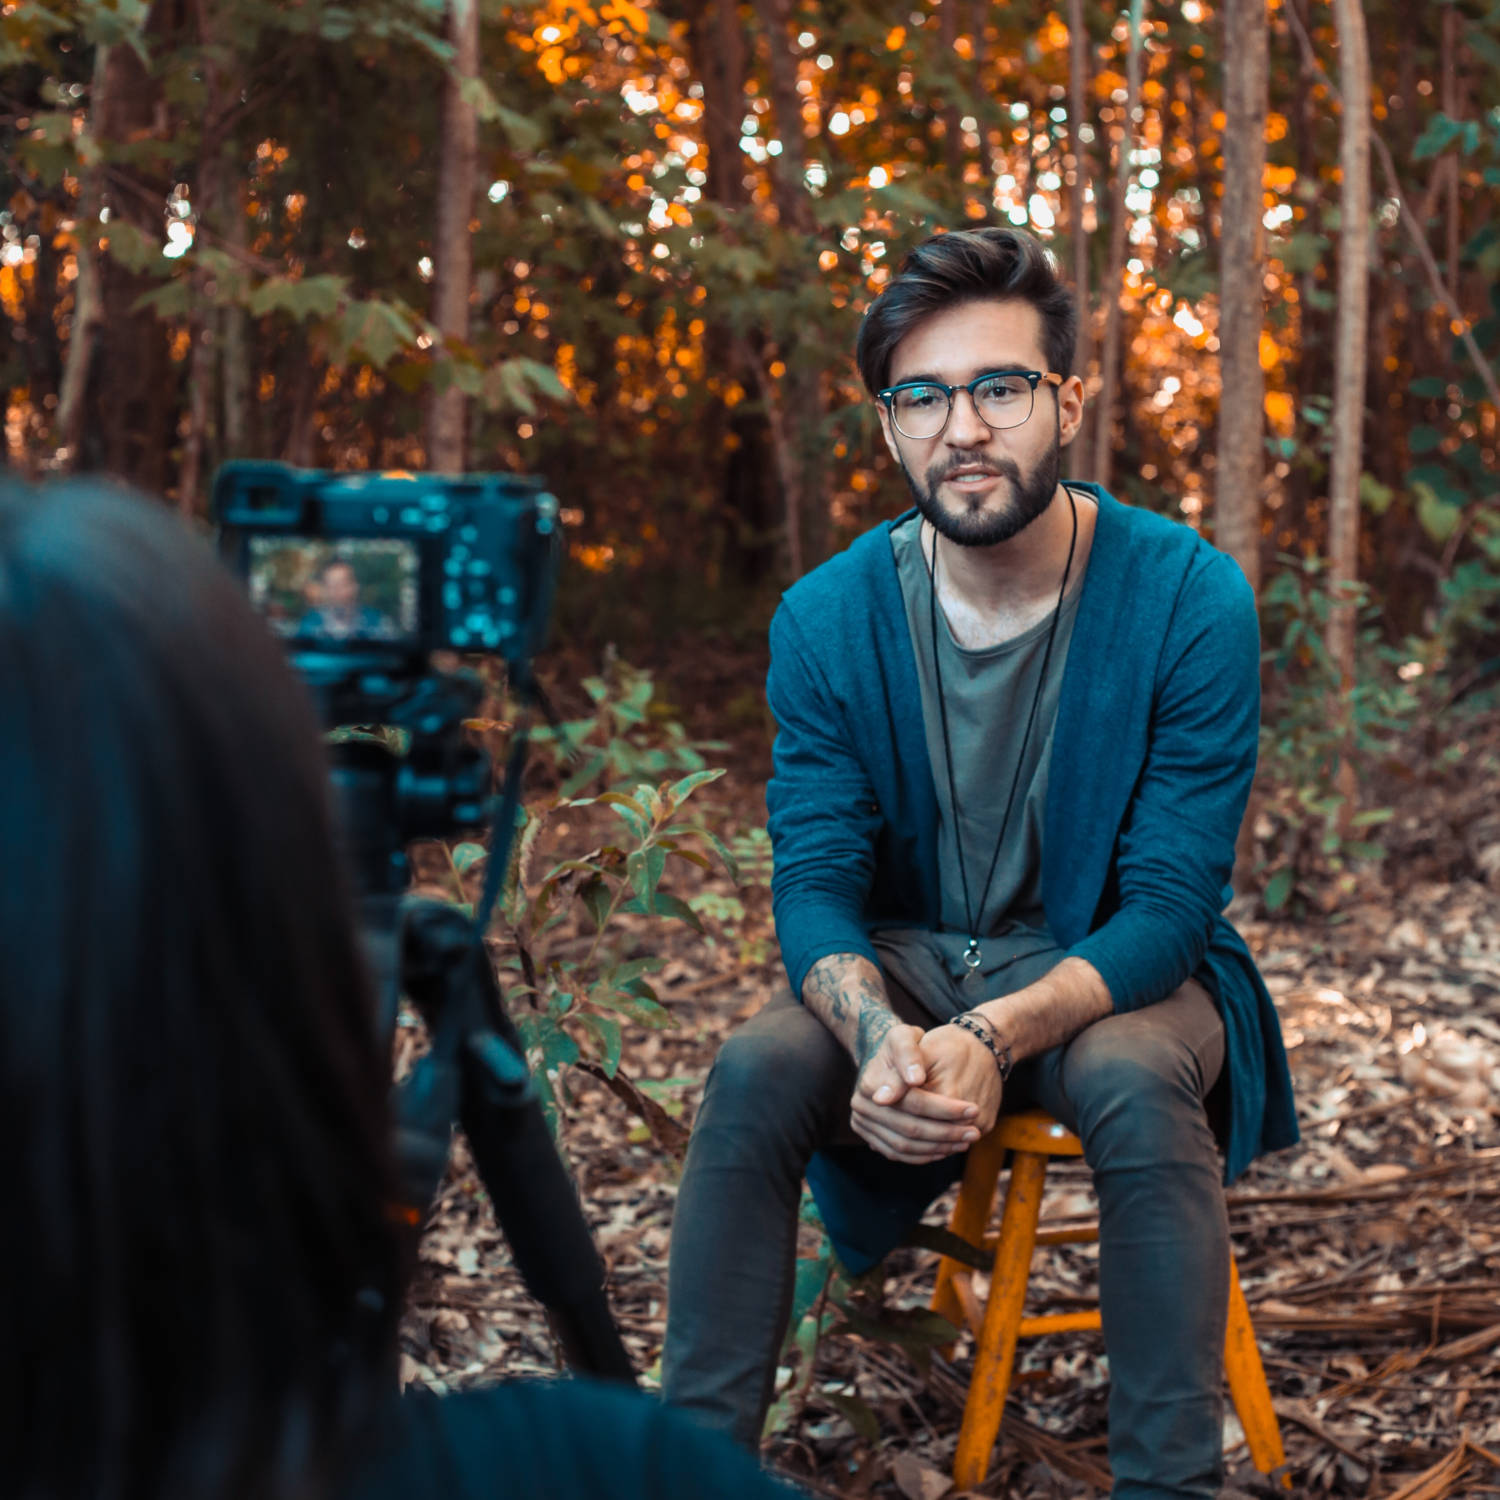 Seated man being photographed in a forest; photographer partly visible